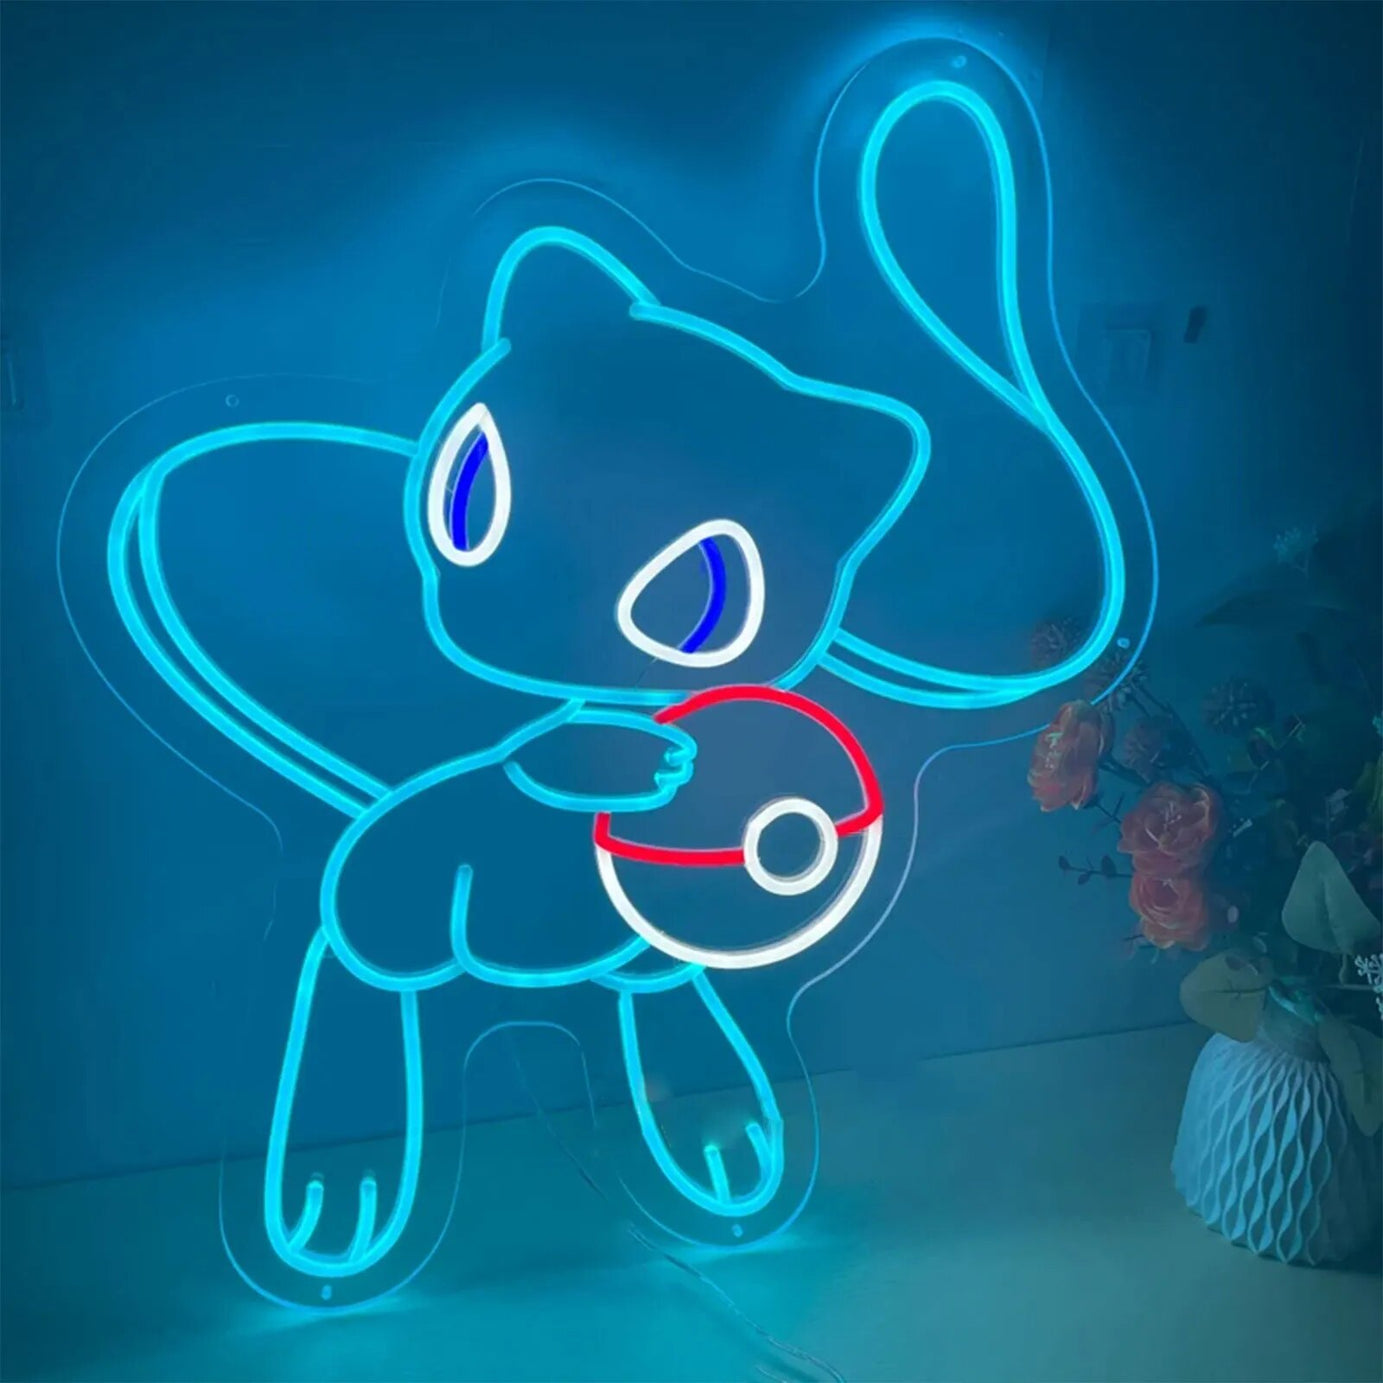 ustom Anime Pokemon LED Neon Light: Adorable Neon Sign for Indoor Walls, Perfect for Weddings, Events, Parties, Home Decor